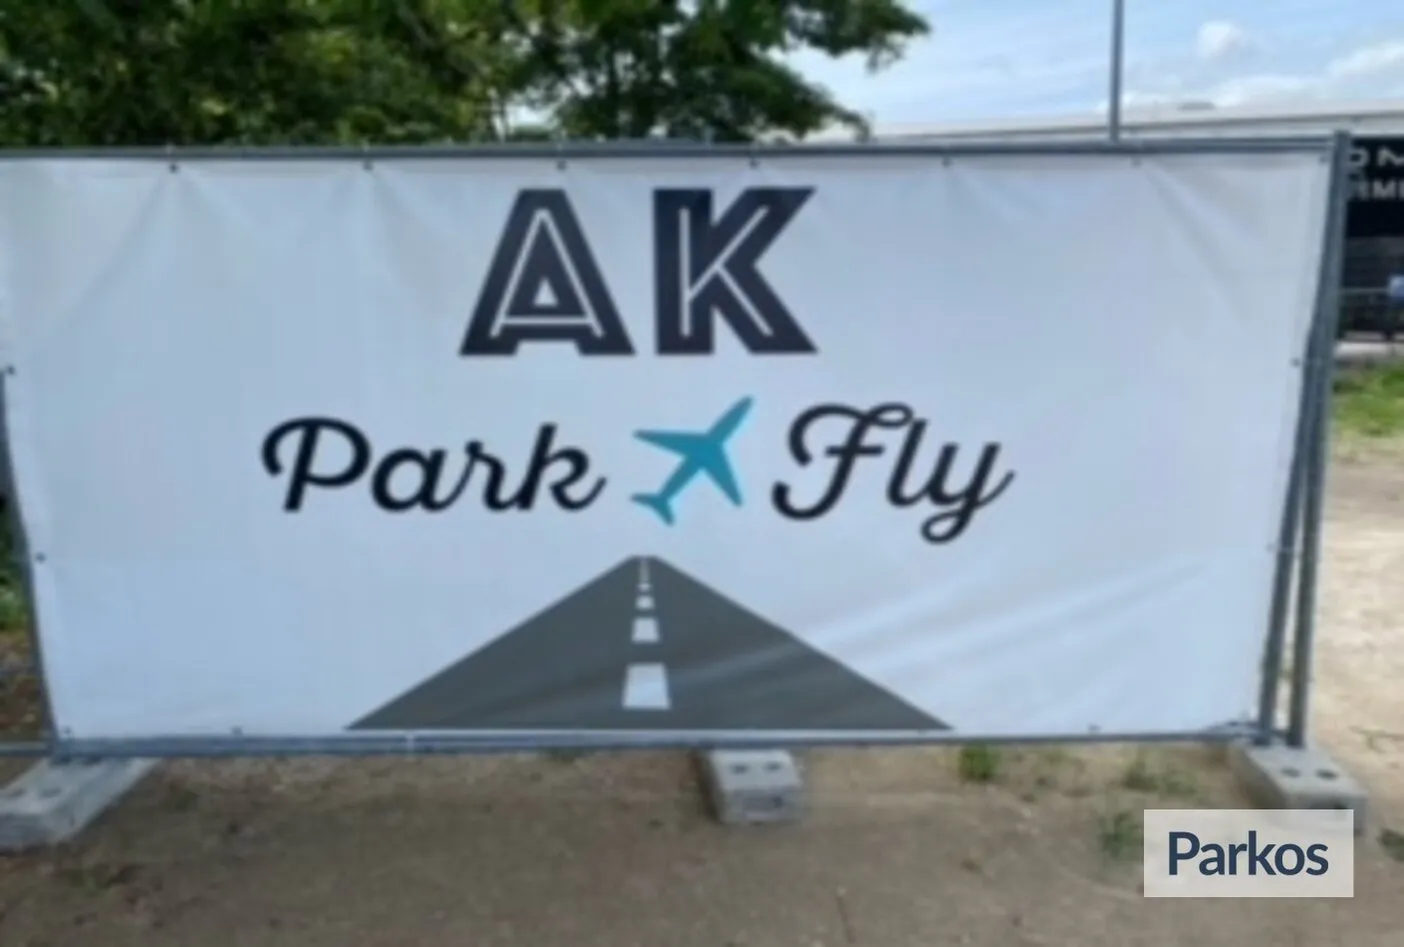 AK Park & Fly - Hamburg Airport Parking - picture 1